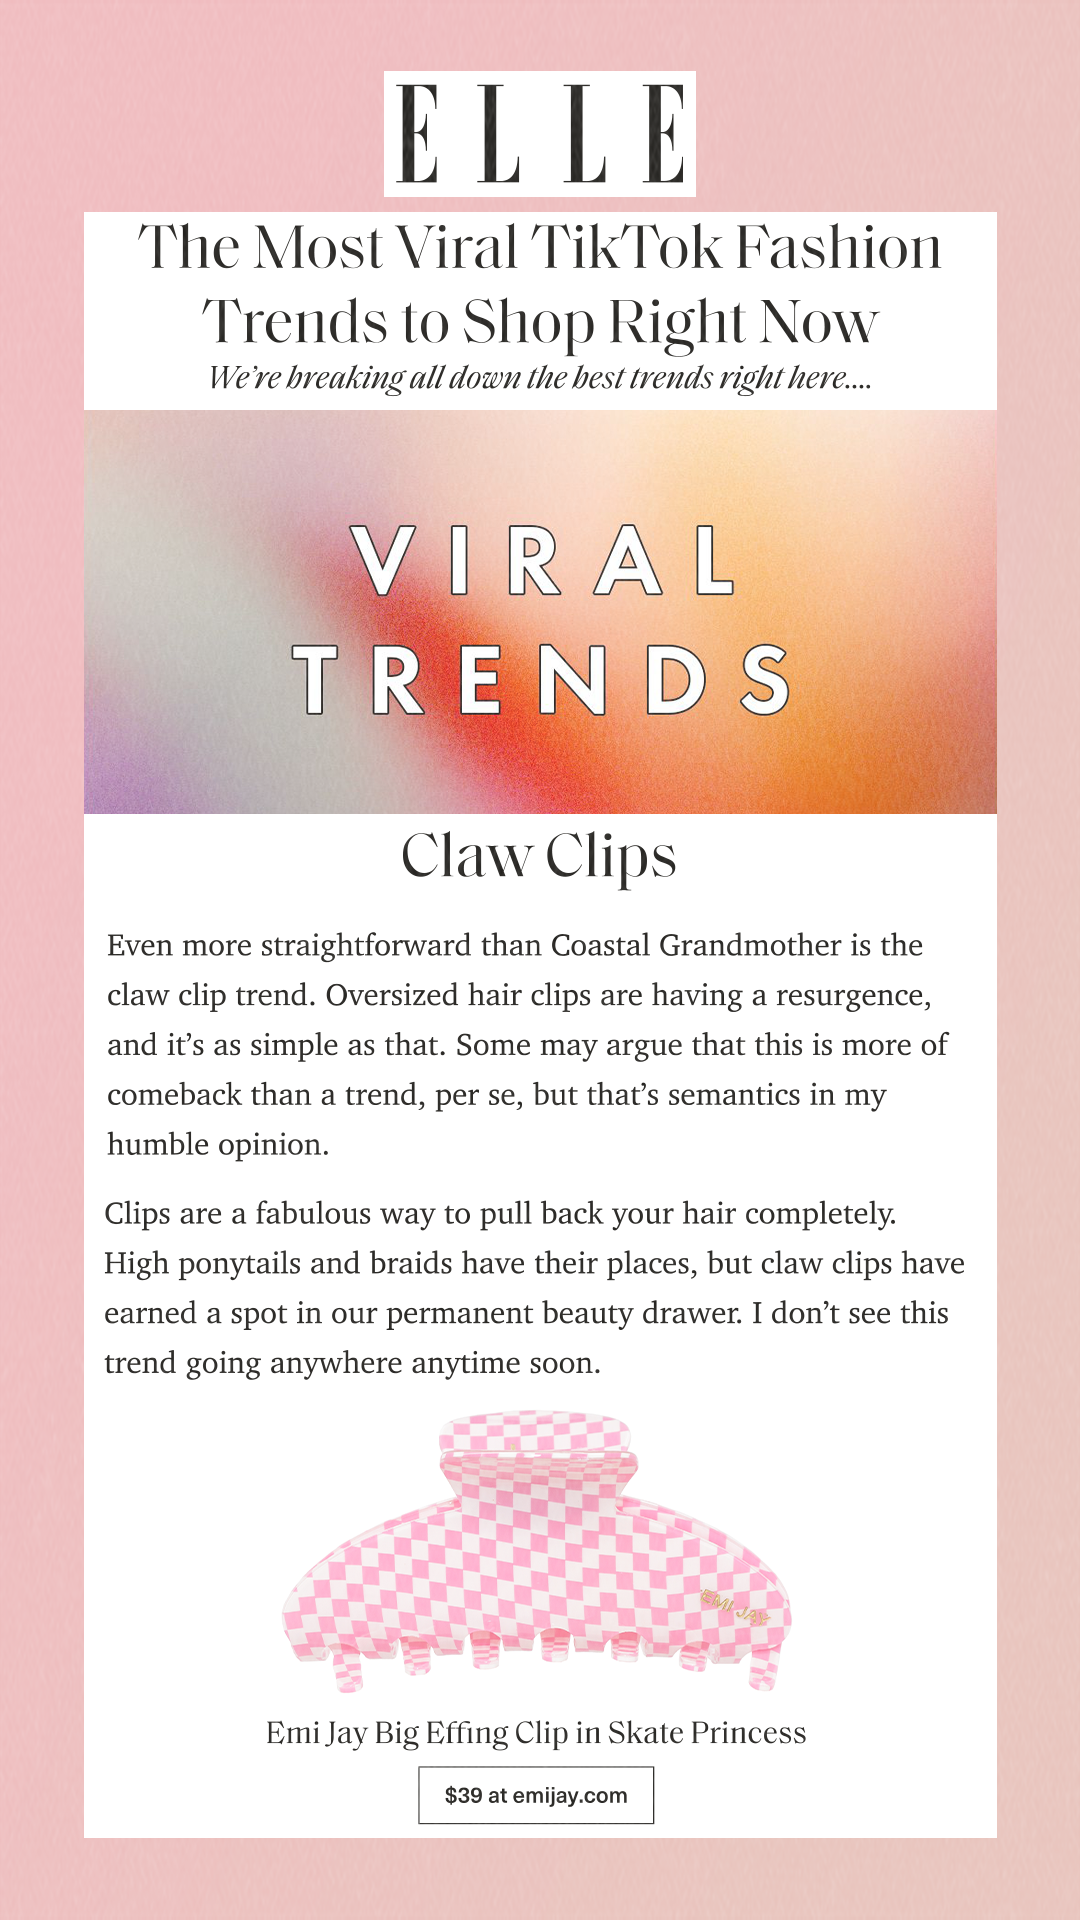 The Most Viral TikTok Fashion Trends to Shop Right Now We’re breaking all down the best trends right here. Claw Clips Even more straightforward than Coastal Grandmother is the claw clip trend. Oversized hair clips are having a resurgence, and it’s as simple as that. Some may argue that this is more of comeback than a trend, per se, but that’s semantics in my humble opinion. Clips are a fabulous way to pull back your hair completely. High ponytails and braids have their places, but claw clips have earned a spot in our permanent beauty drawer. I don’t see this trend going anywhere anytime soon. Emi Jay Big Effing Clip in Skate Princess